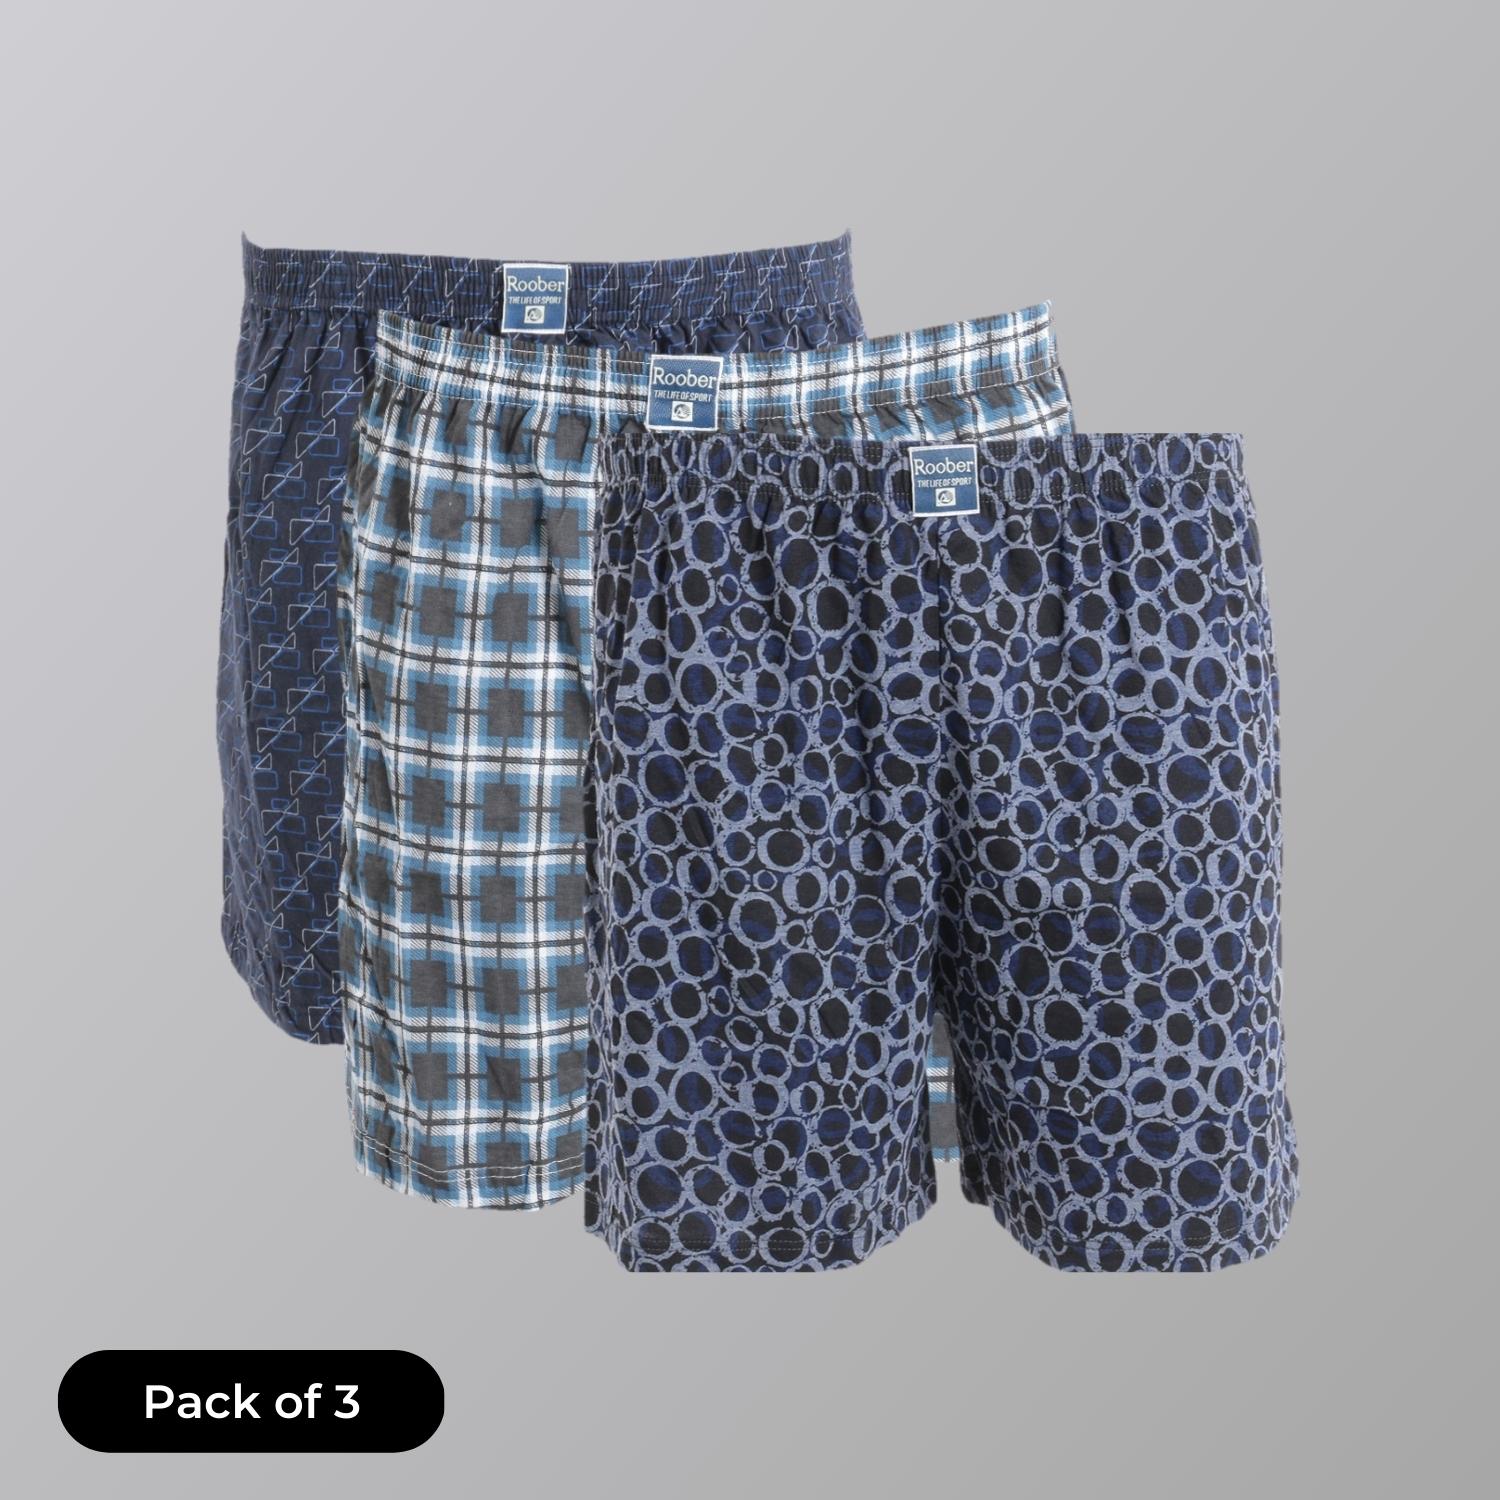 Pack Of 3) Roober Original Men Printed Comfy Cotton Boxer Shorts - Assorted  Color, Fashion, Innerwear